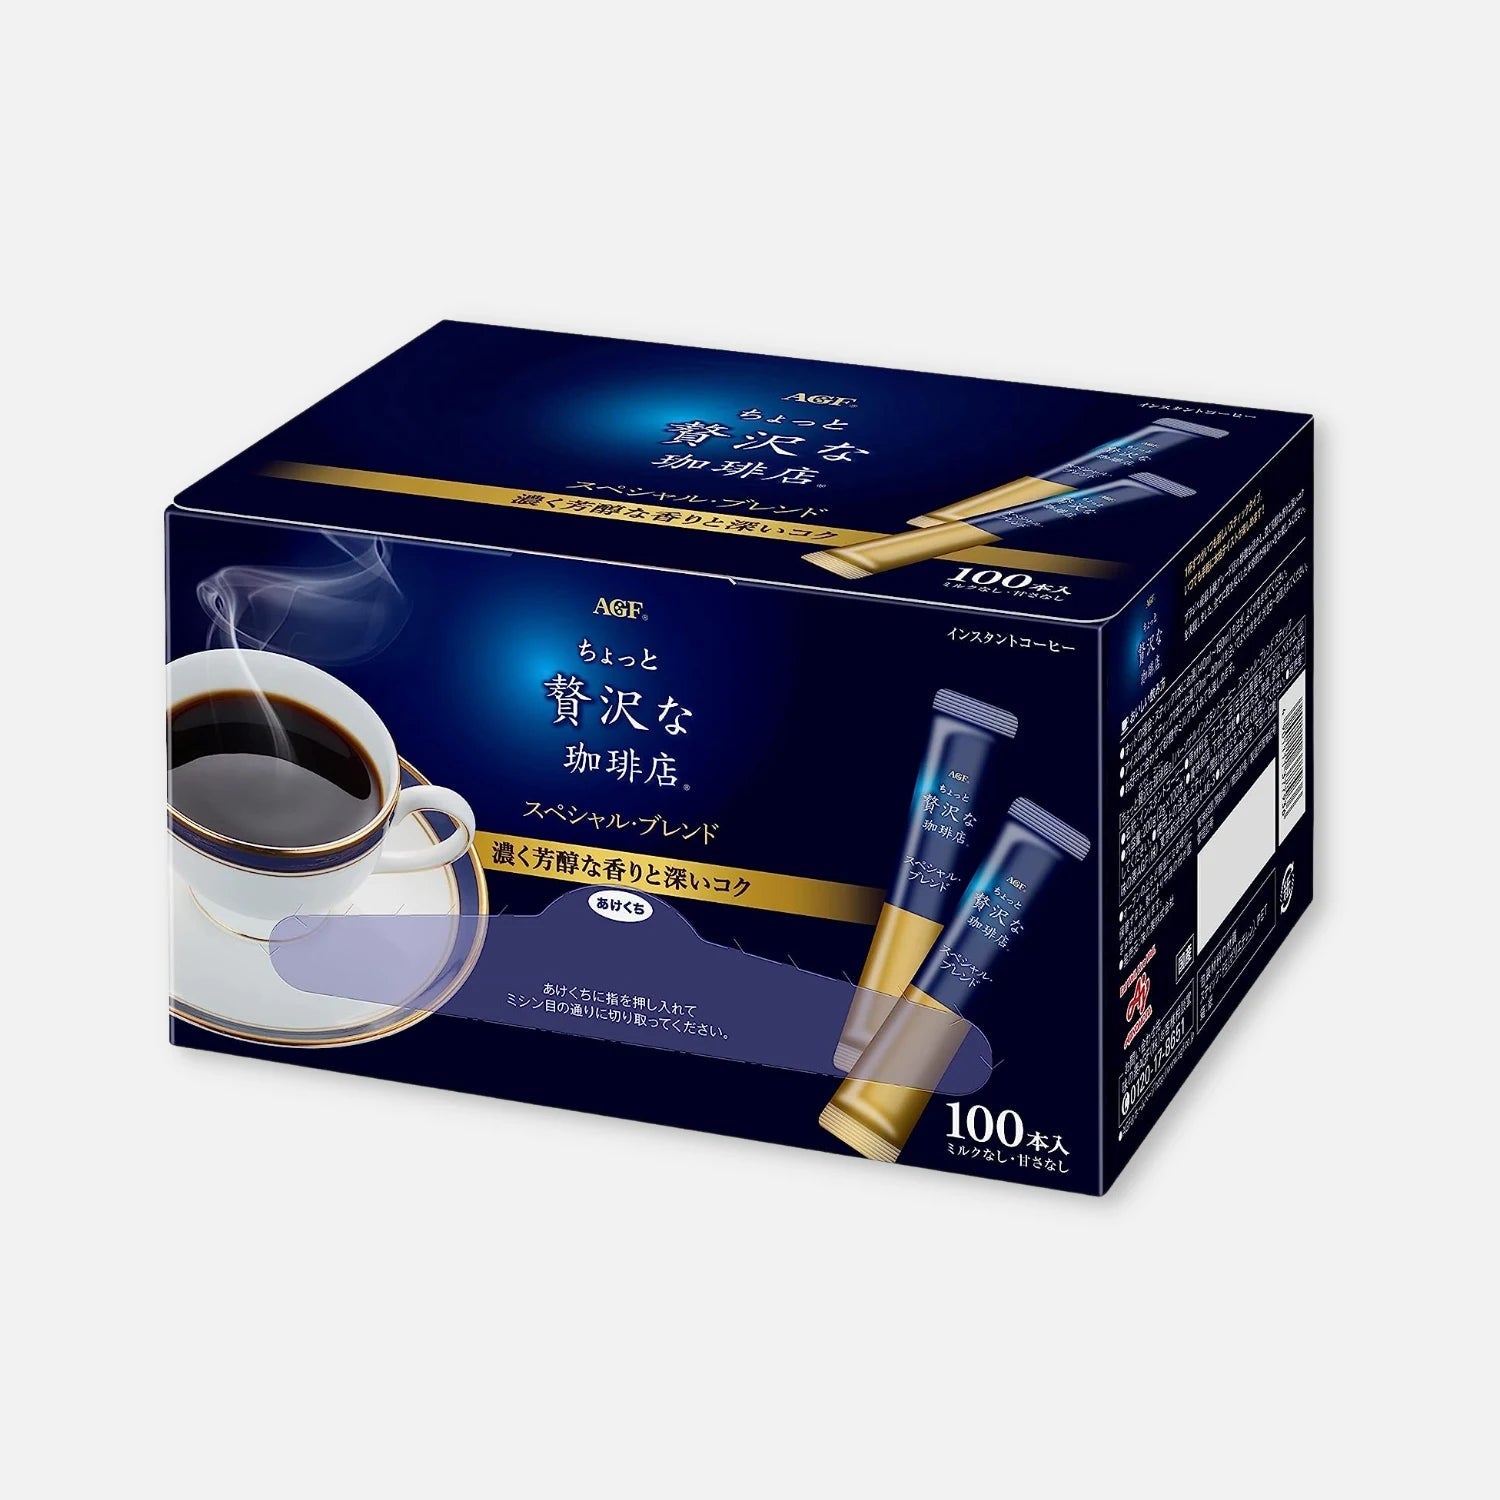 AGF Instant Coffee Luxury Special Blend (Pack of 26/100)